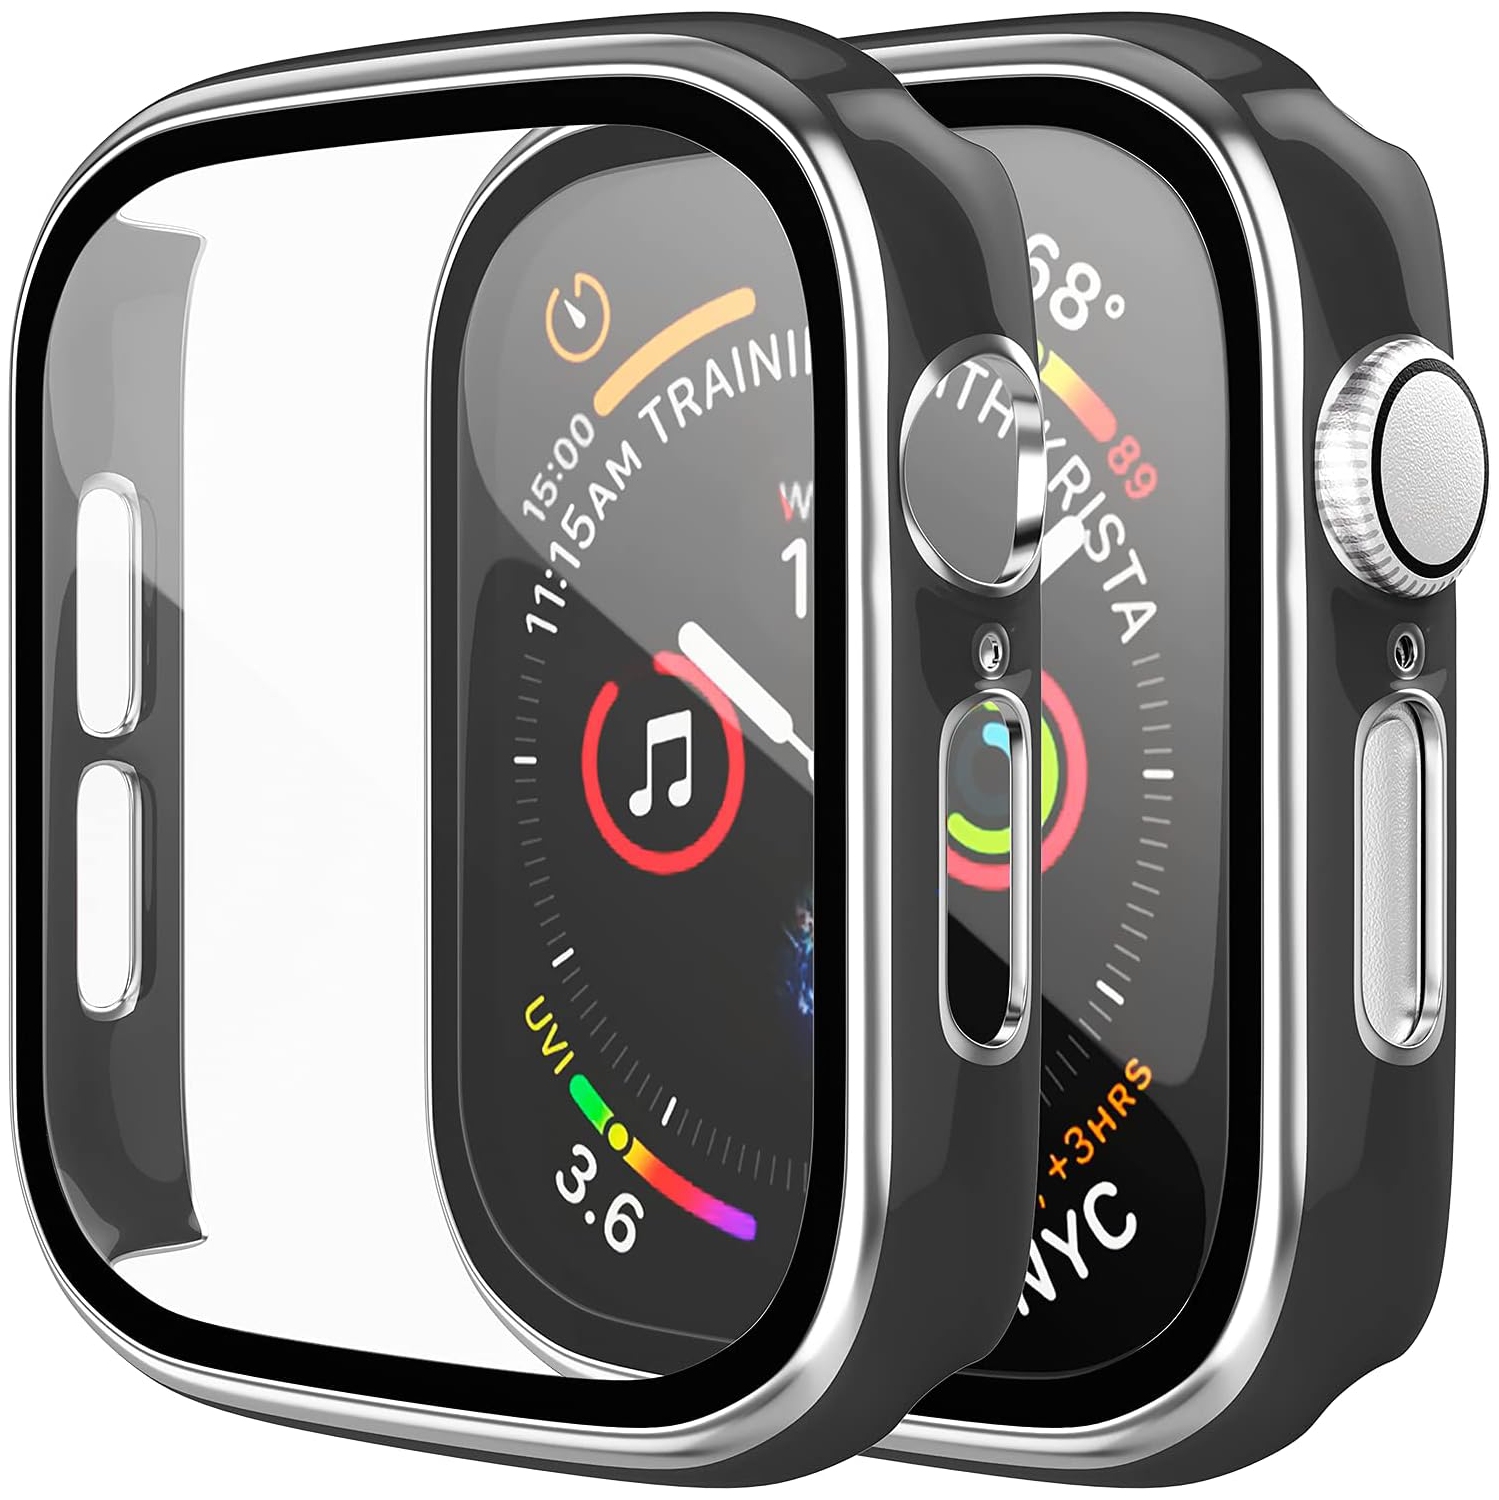 [2 Pack] Compatible with Apple Watch 42mm Series 3/2/1 Case with Built-in Tempered Glass Screen Protector, Thin Guard